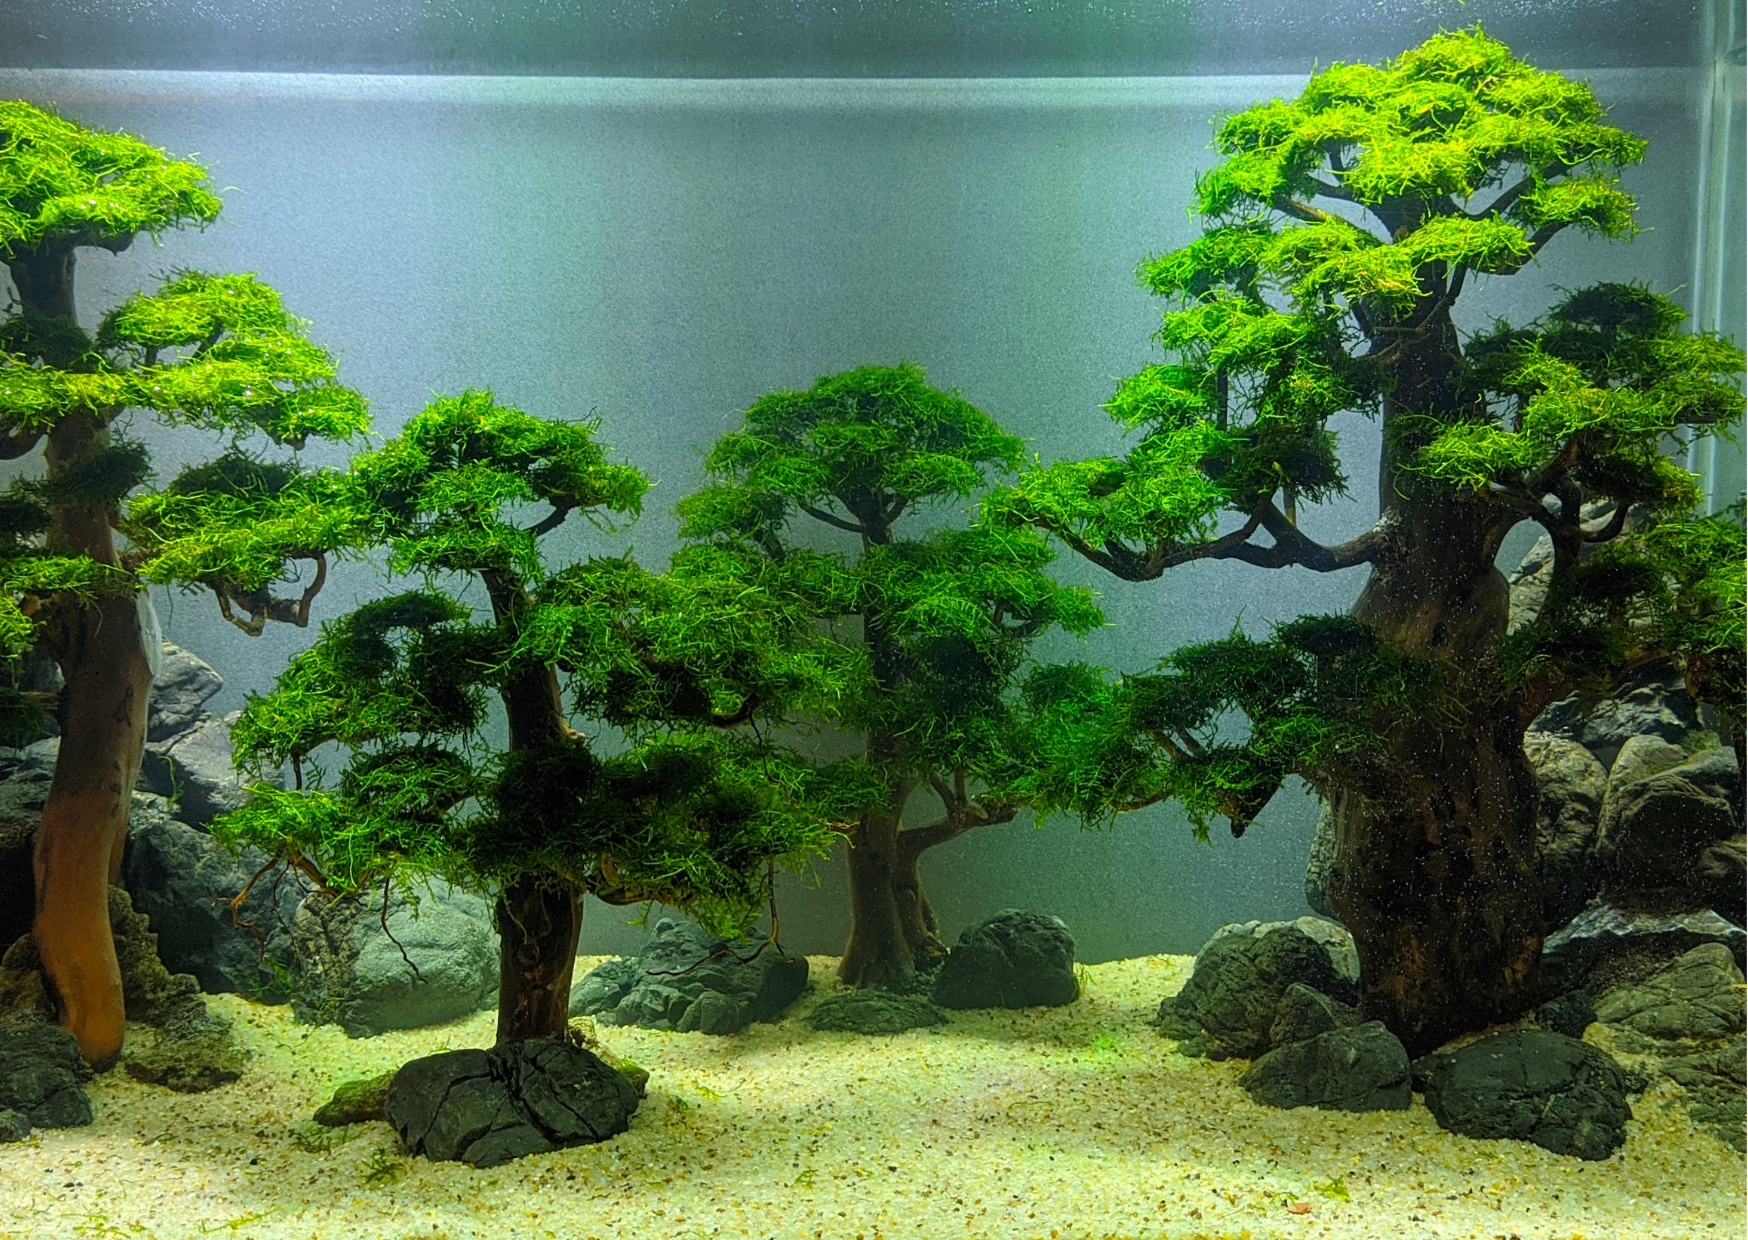 What does the word "aquascape" mean?